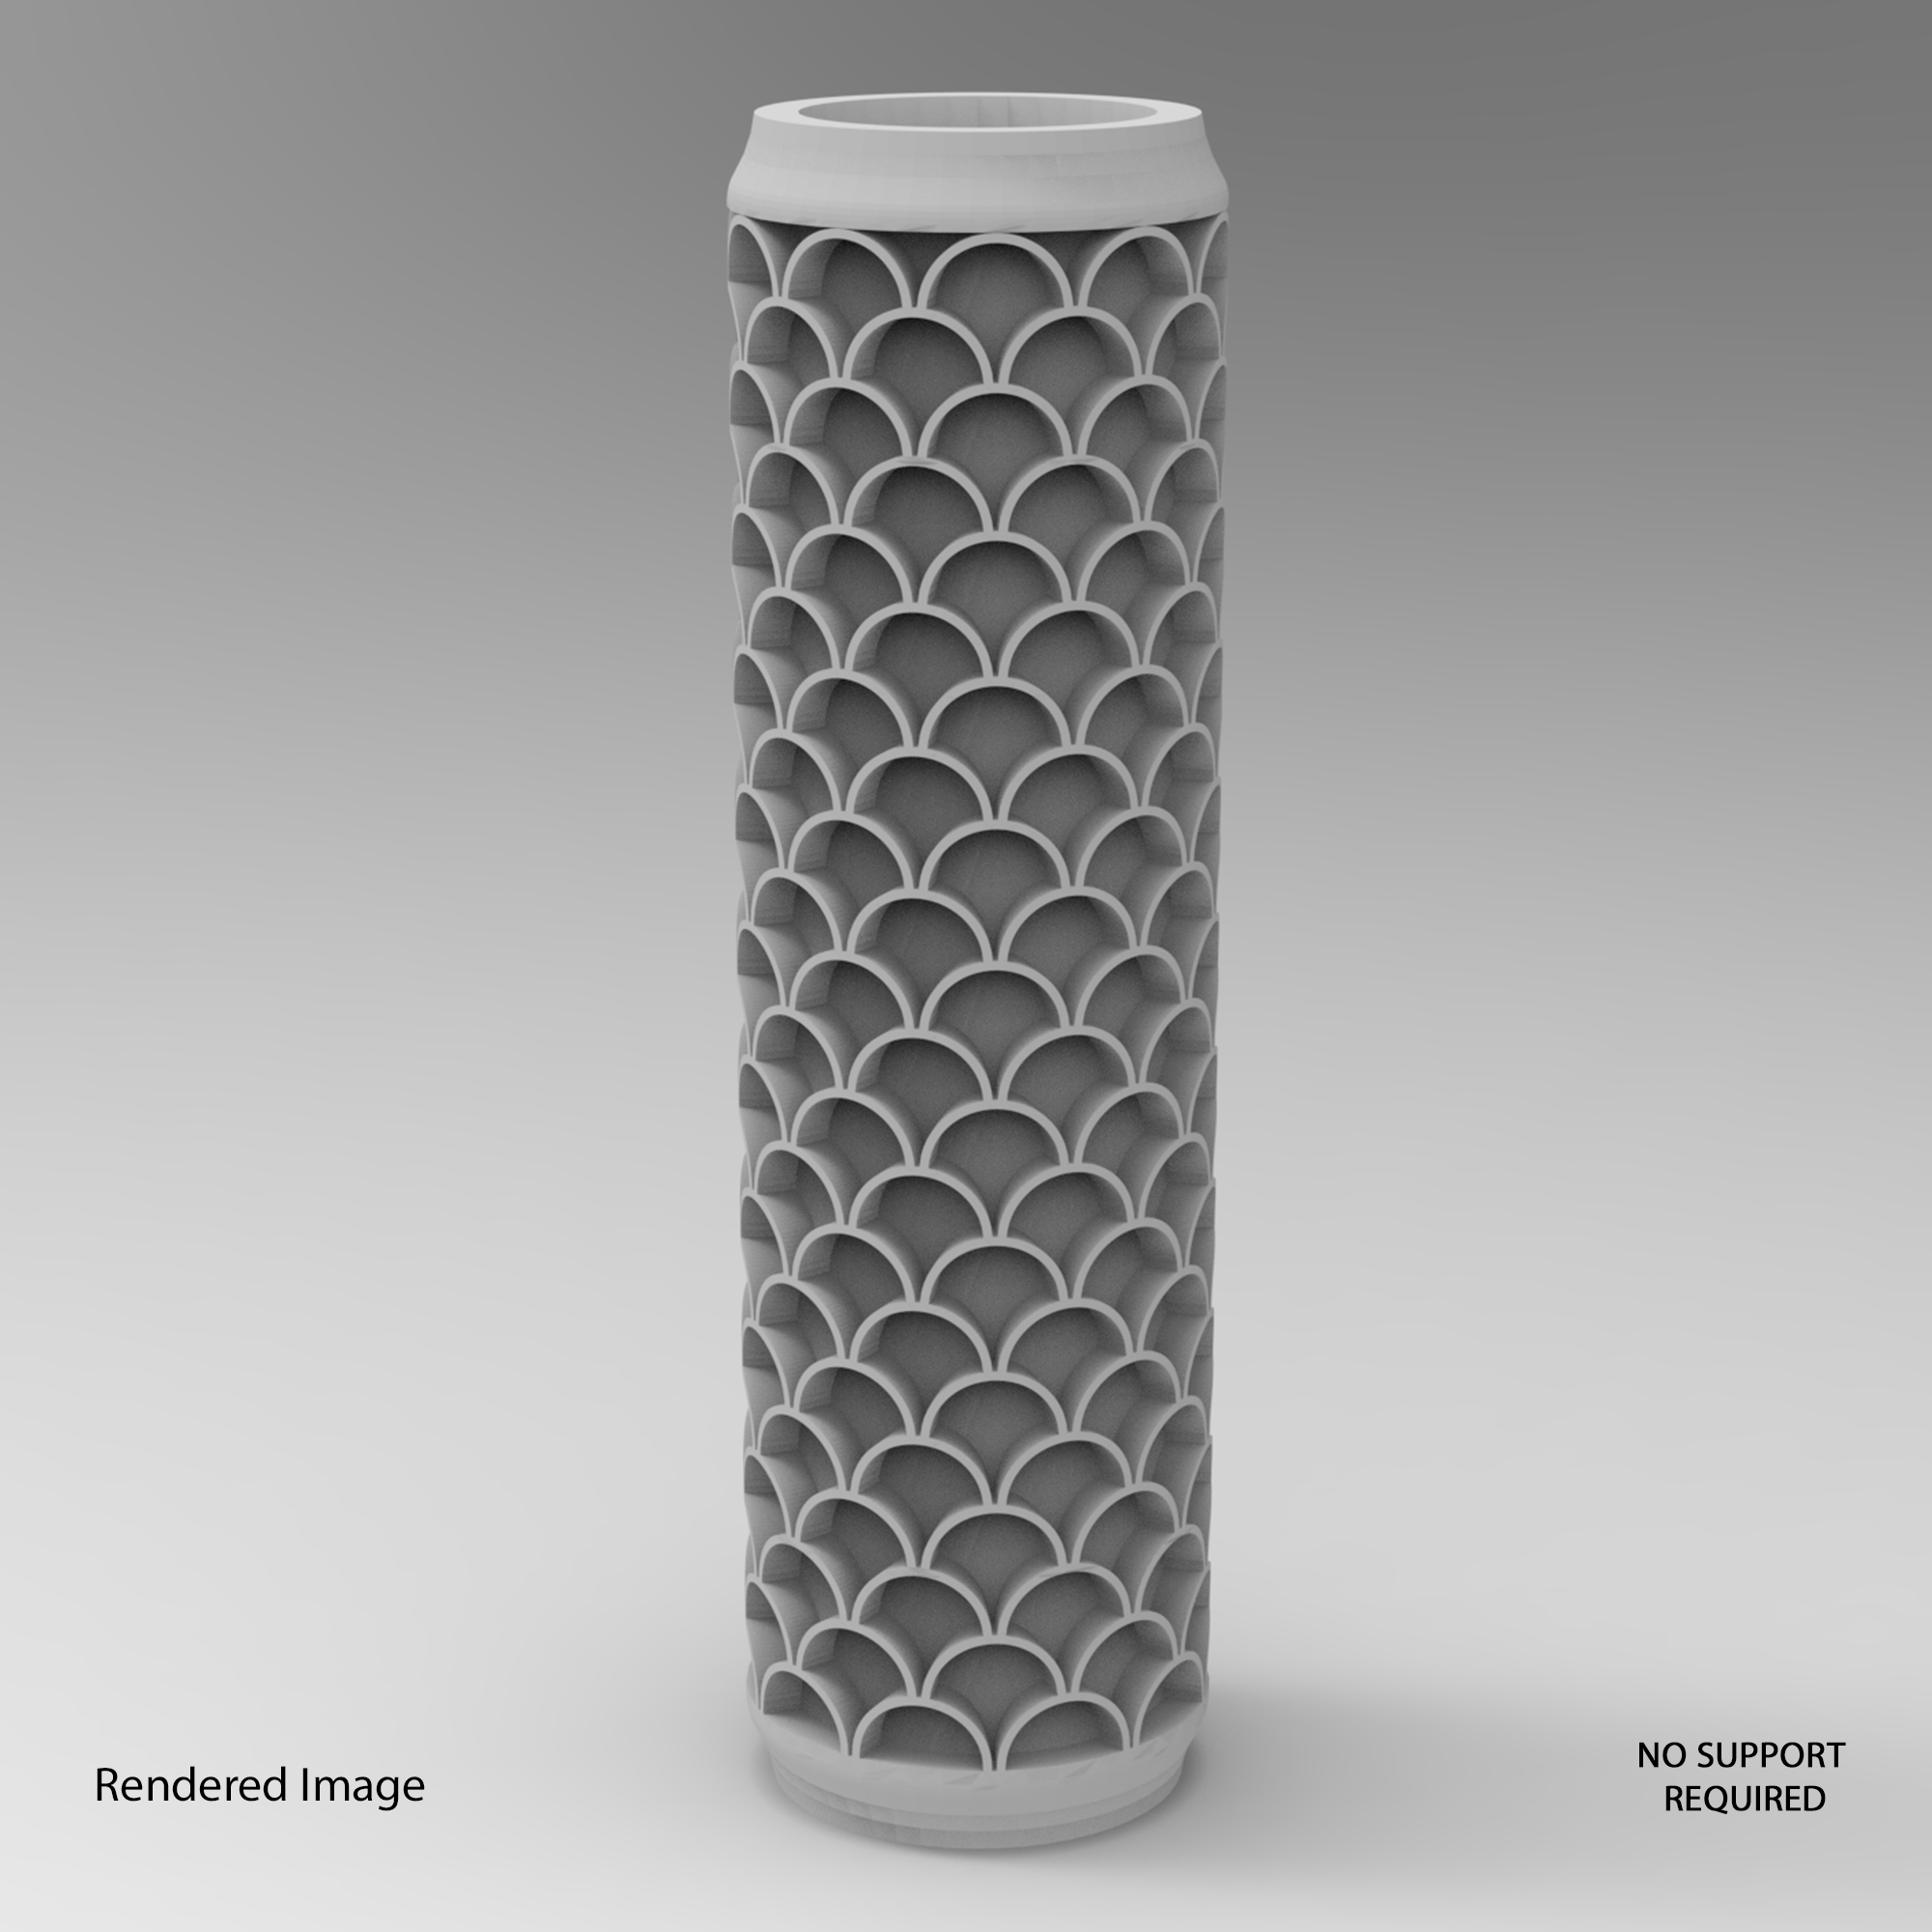 Texture Roller - Round scales (Fish Scales)